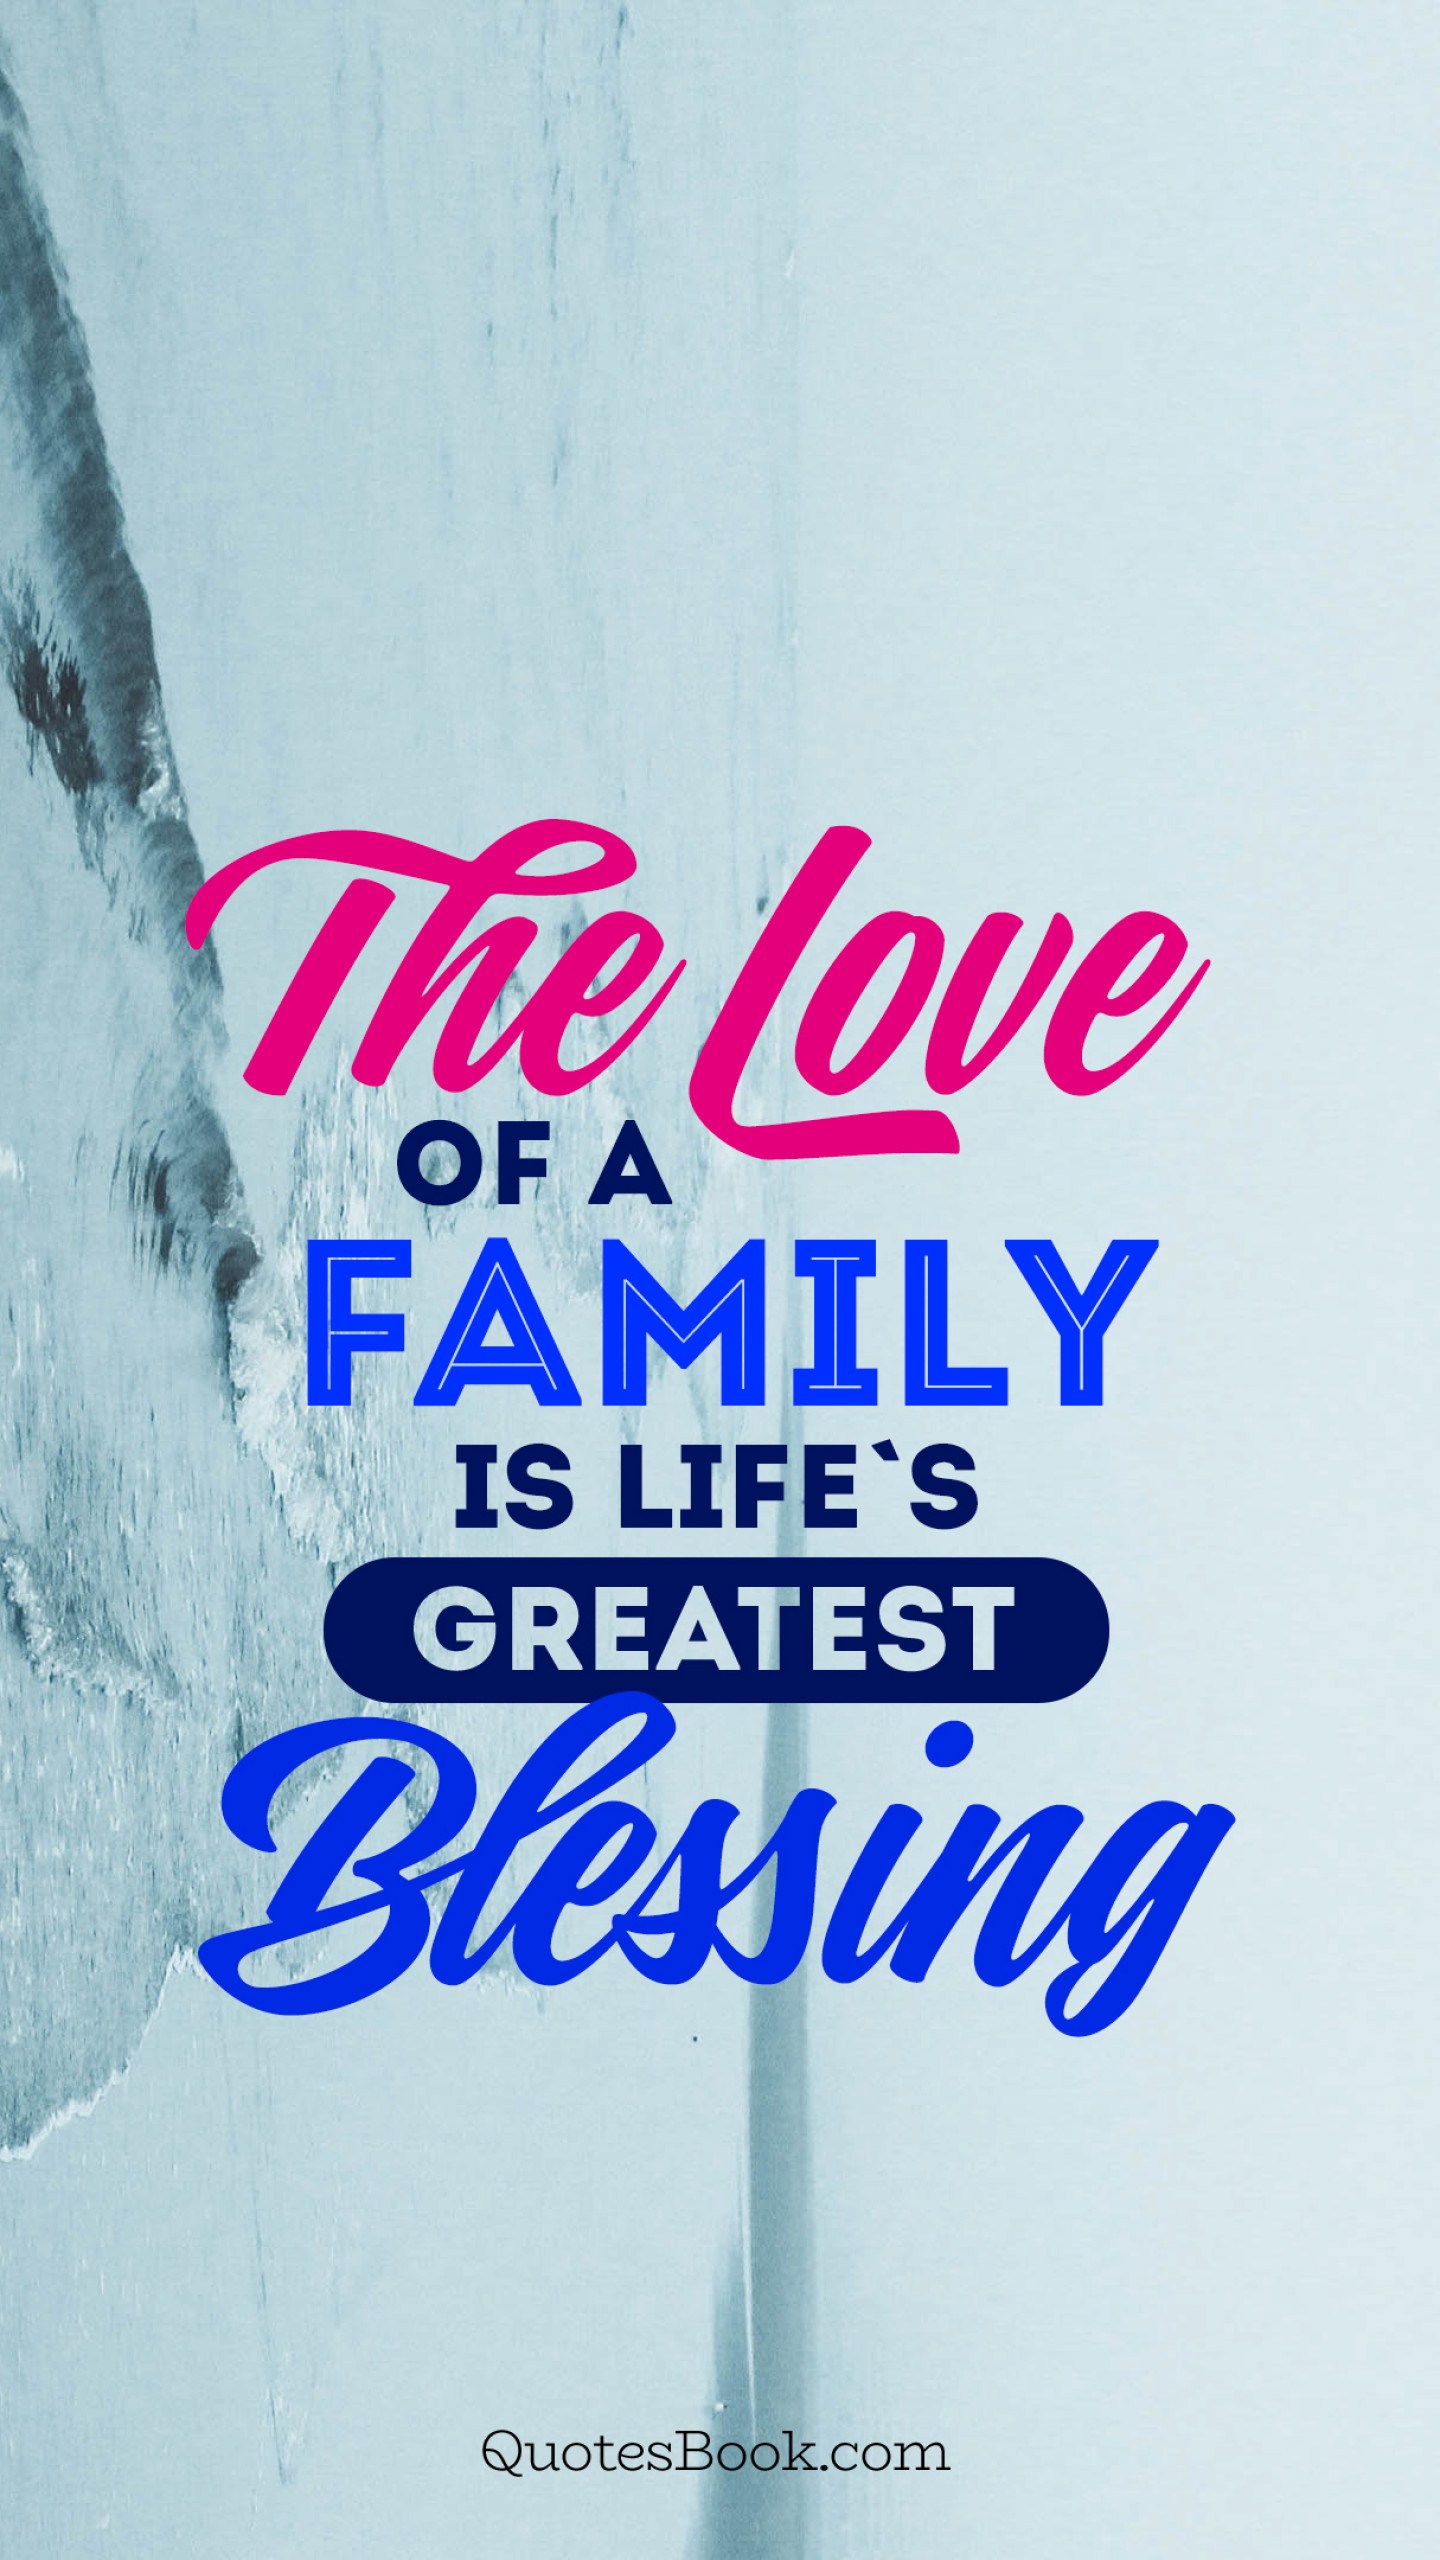 The love of a family is life's greatest blessing - QuotesBook